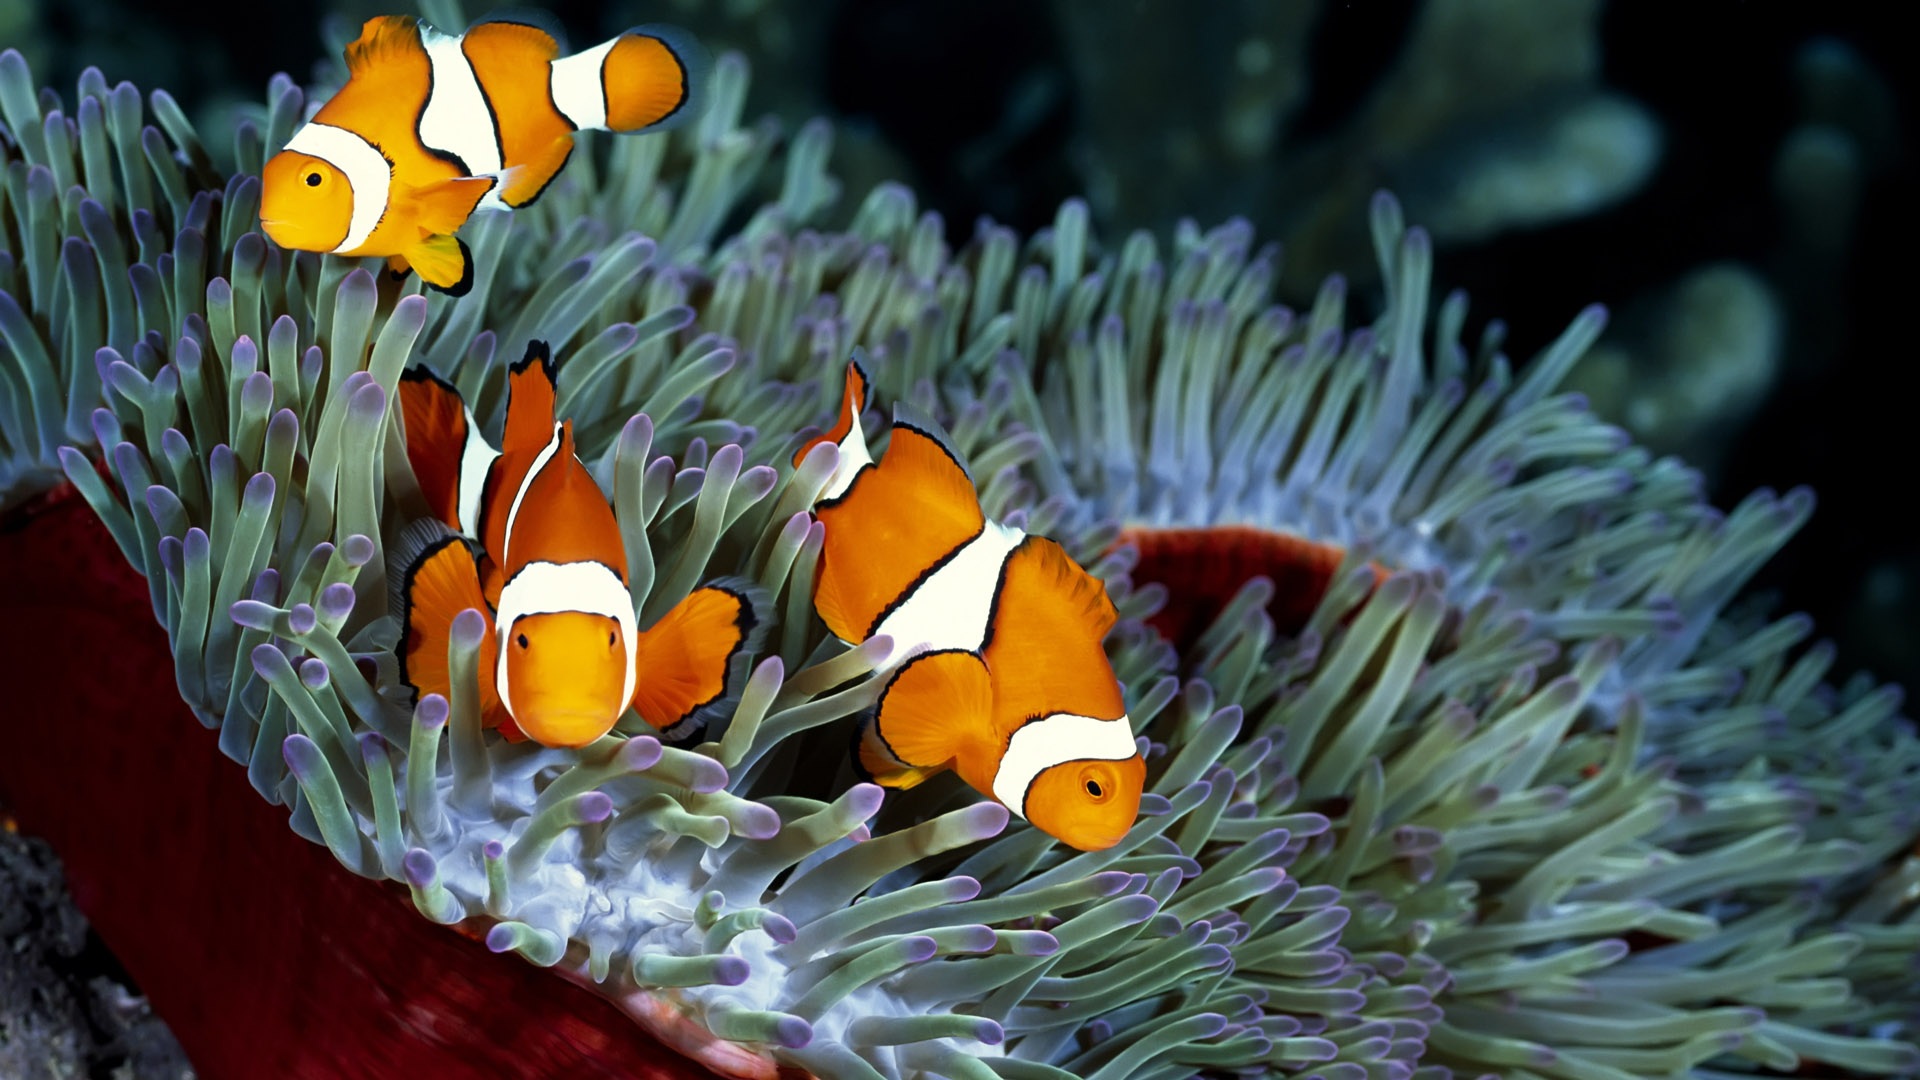 Wallpaper With A Orange Tropical Fish Hd Orange Fish Wallpapers